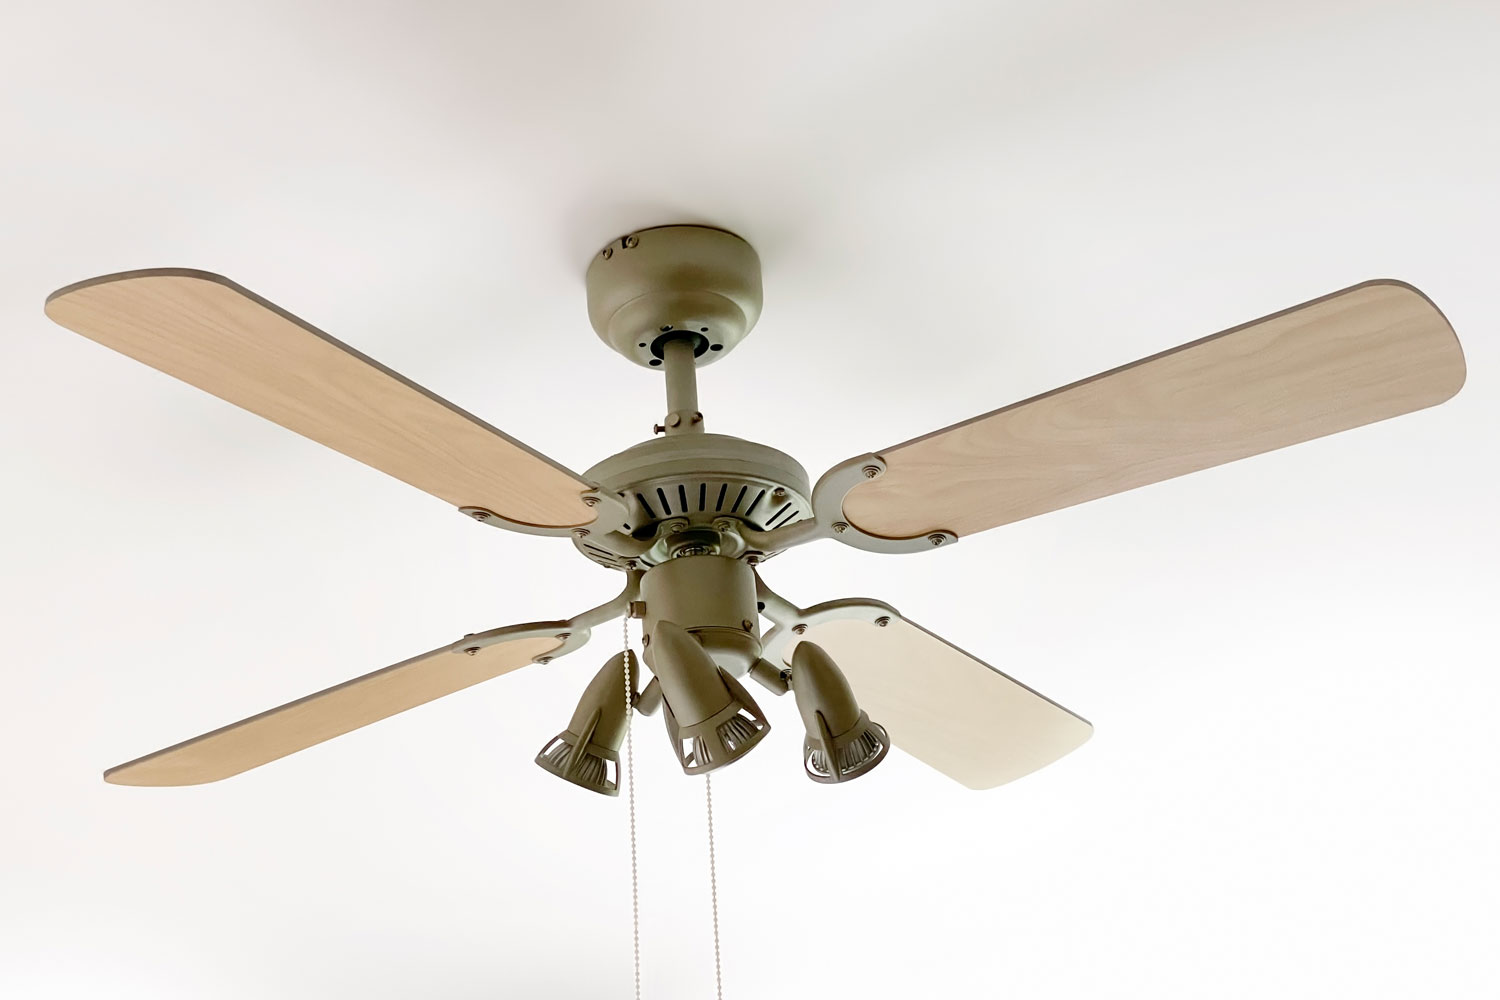 A classic brown and dark green painted ceiling fan